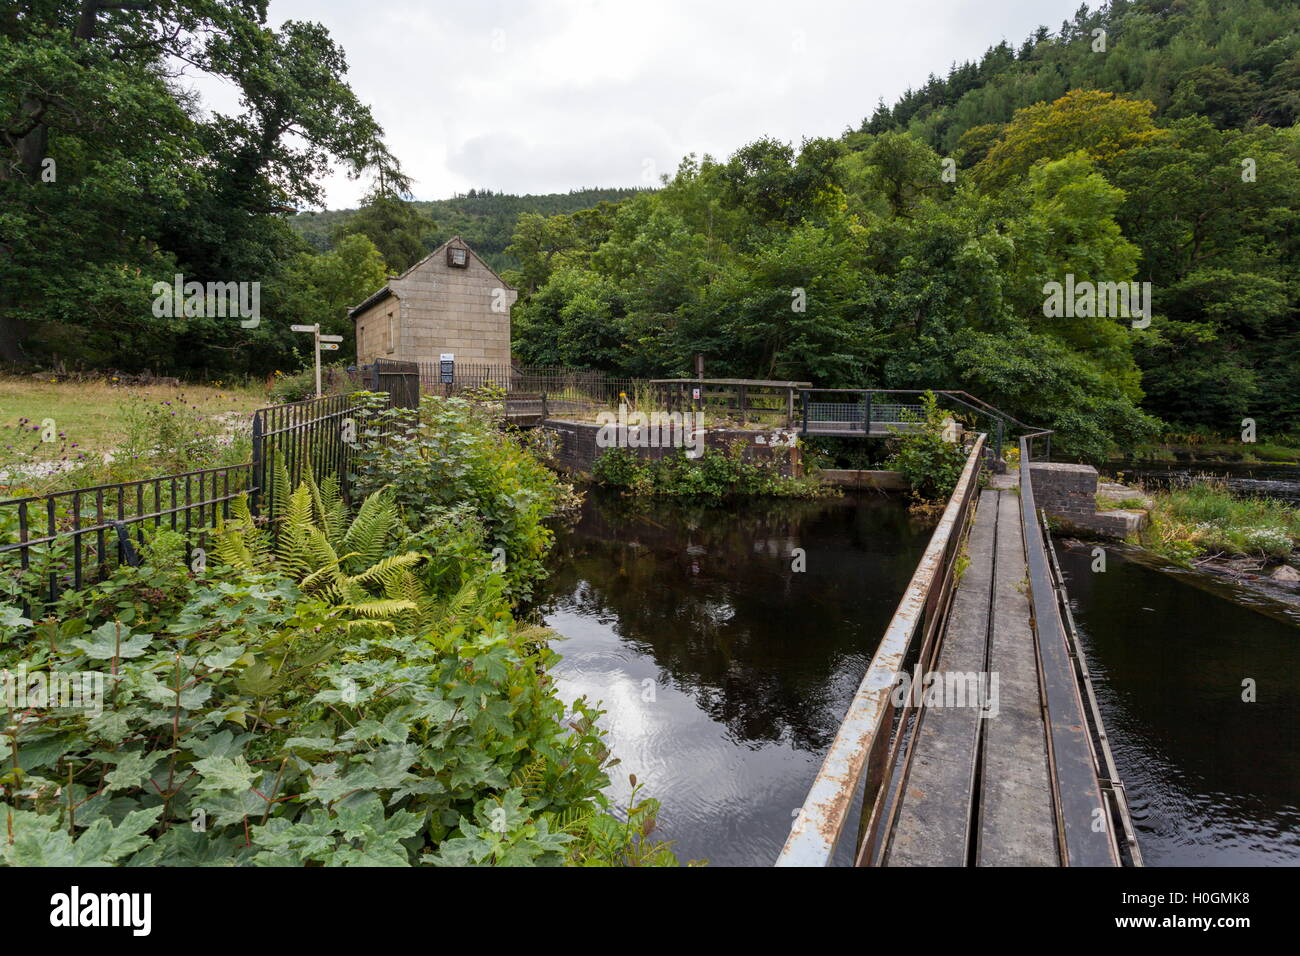 The Valve House on the Llangollen Canal which controls the water from the river Dee into the canal feeder Stock Photo